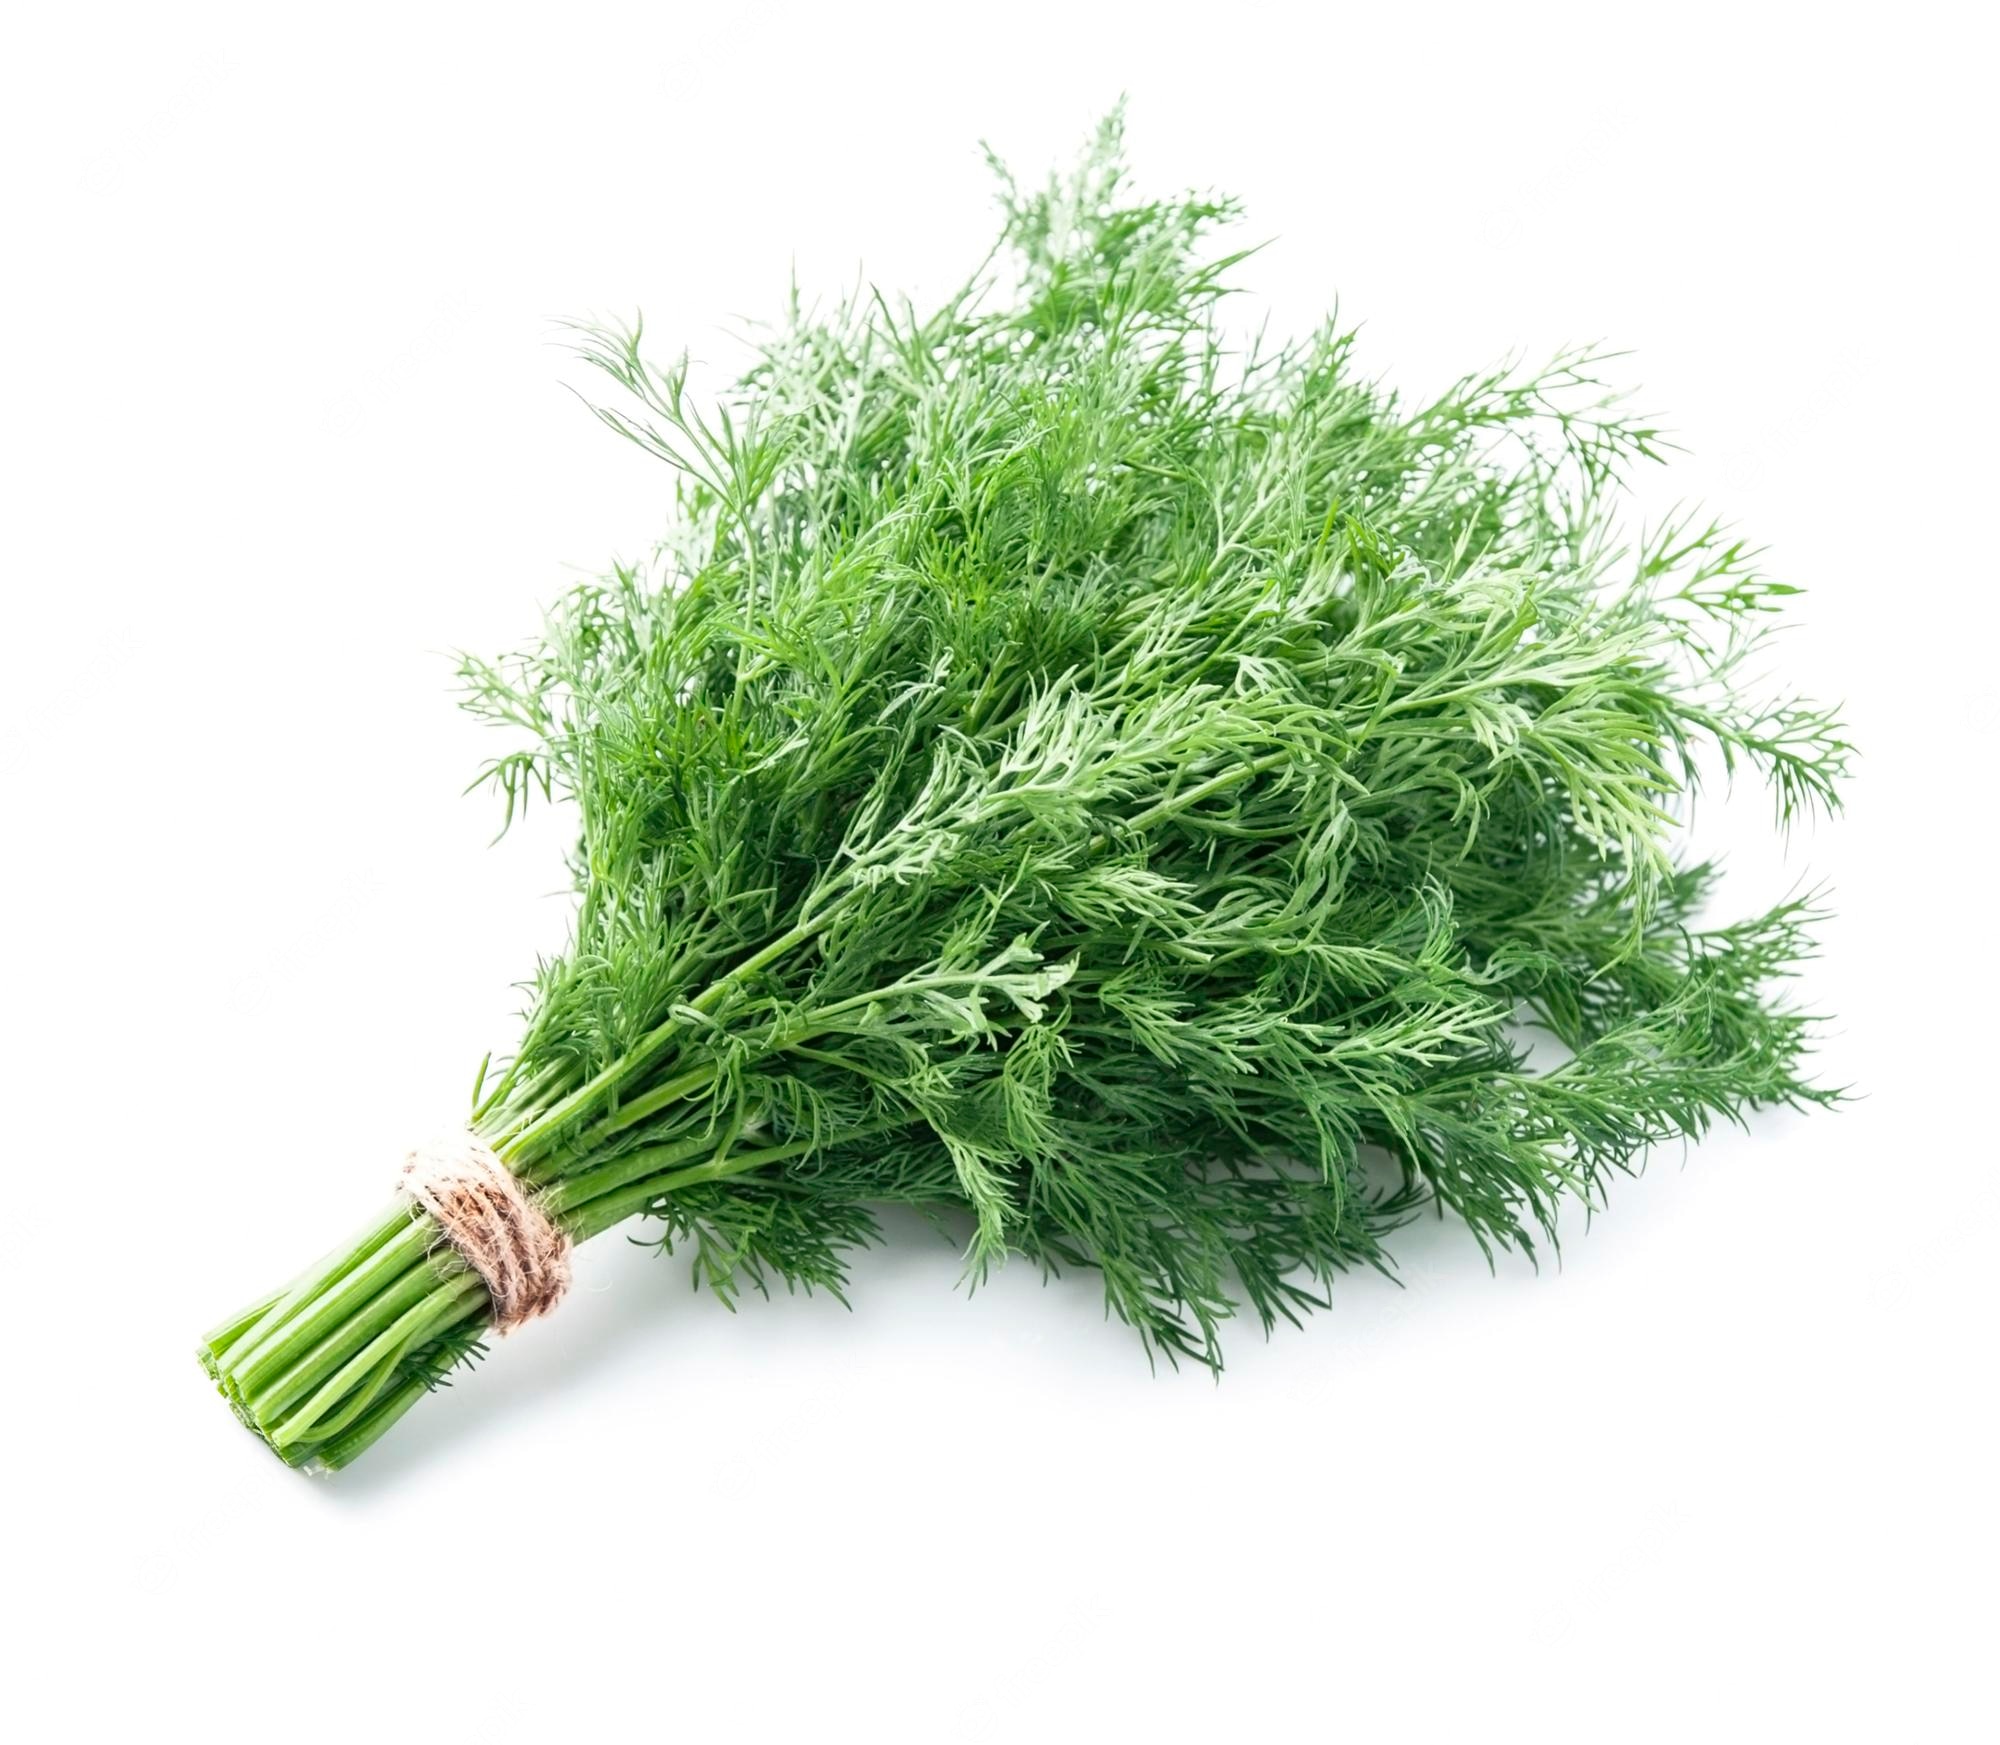 How much dill is in a bunch